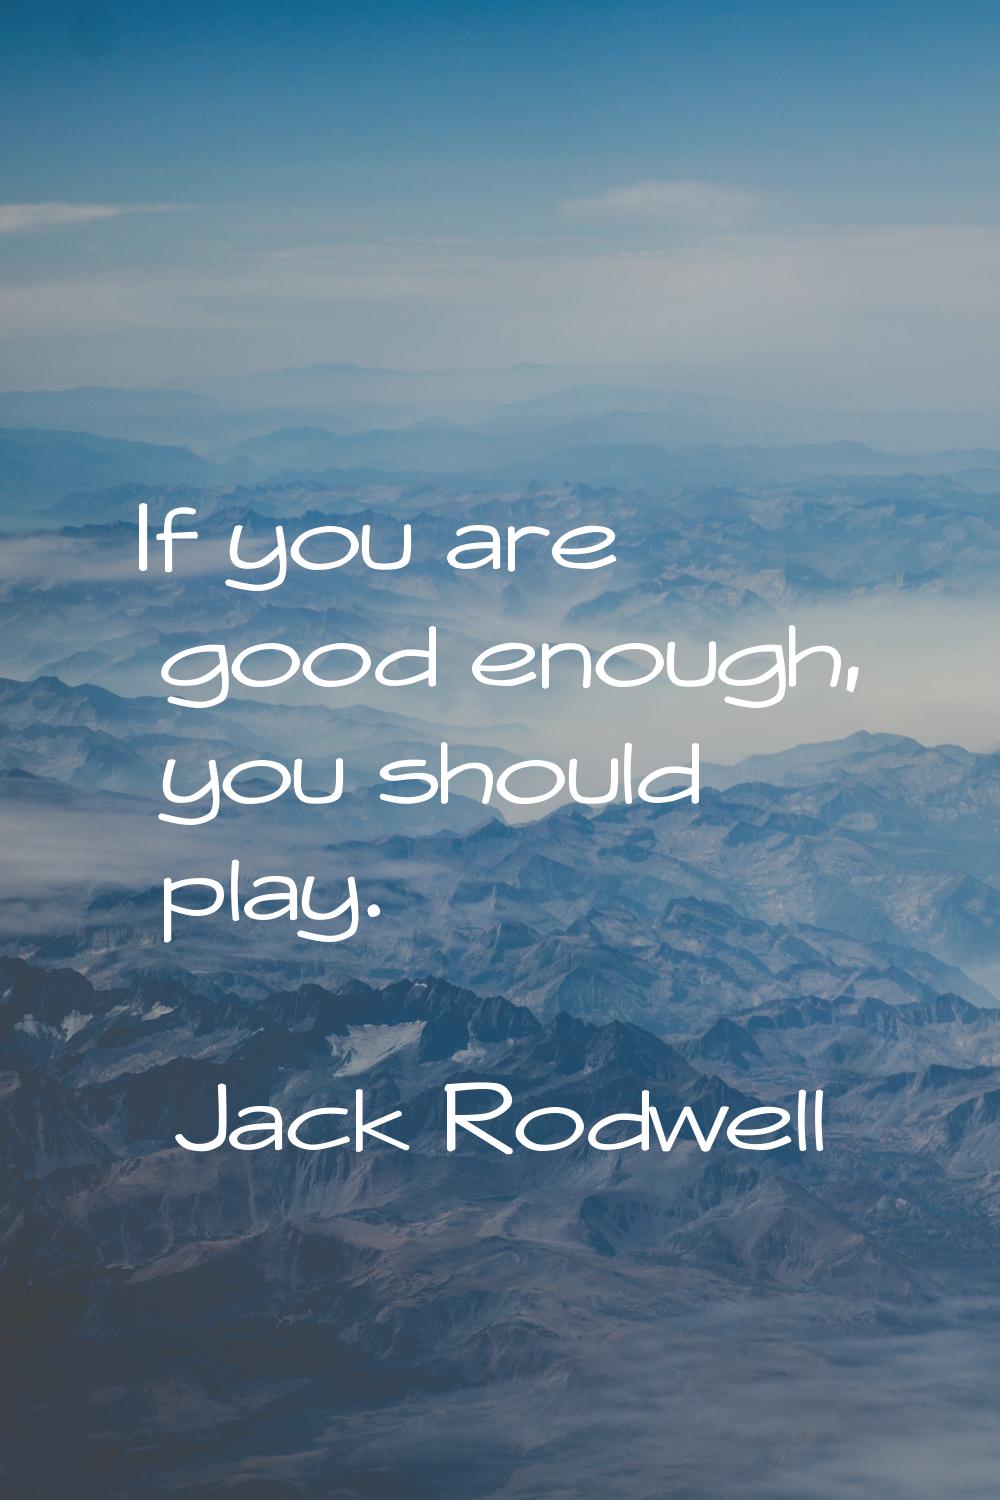 If you are good enough, you should play.